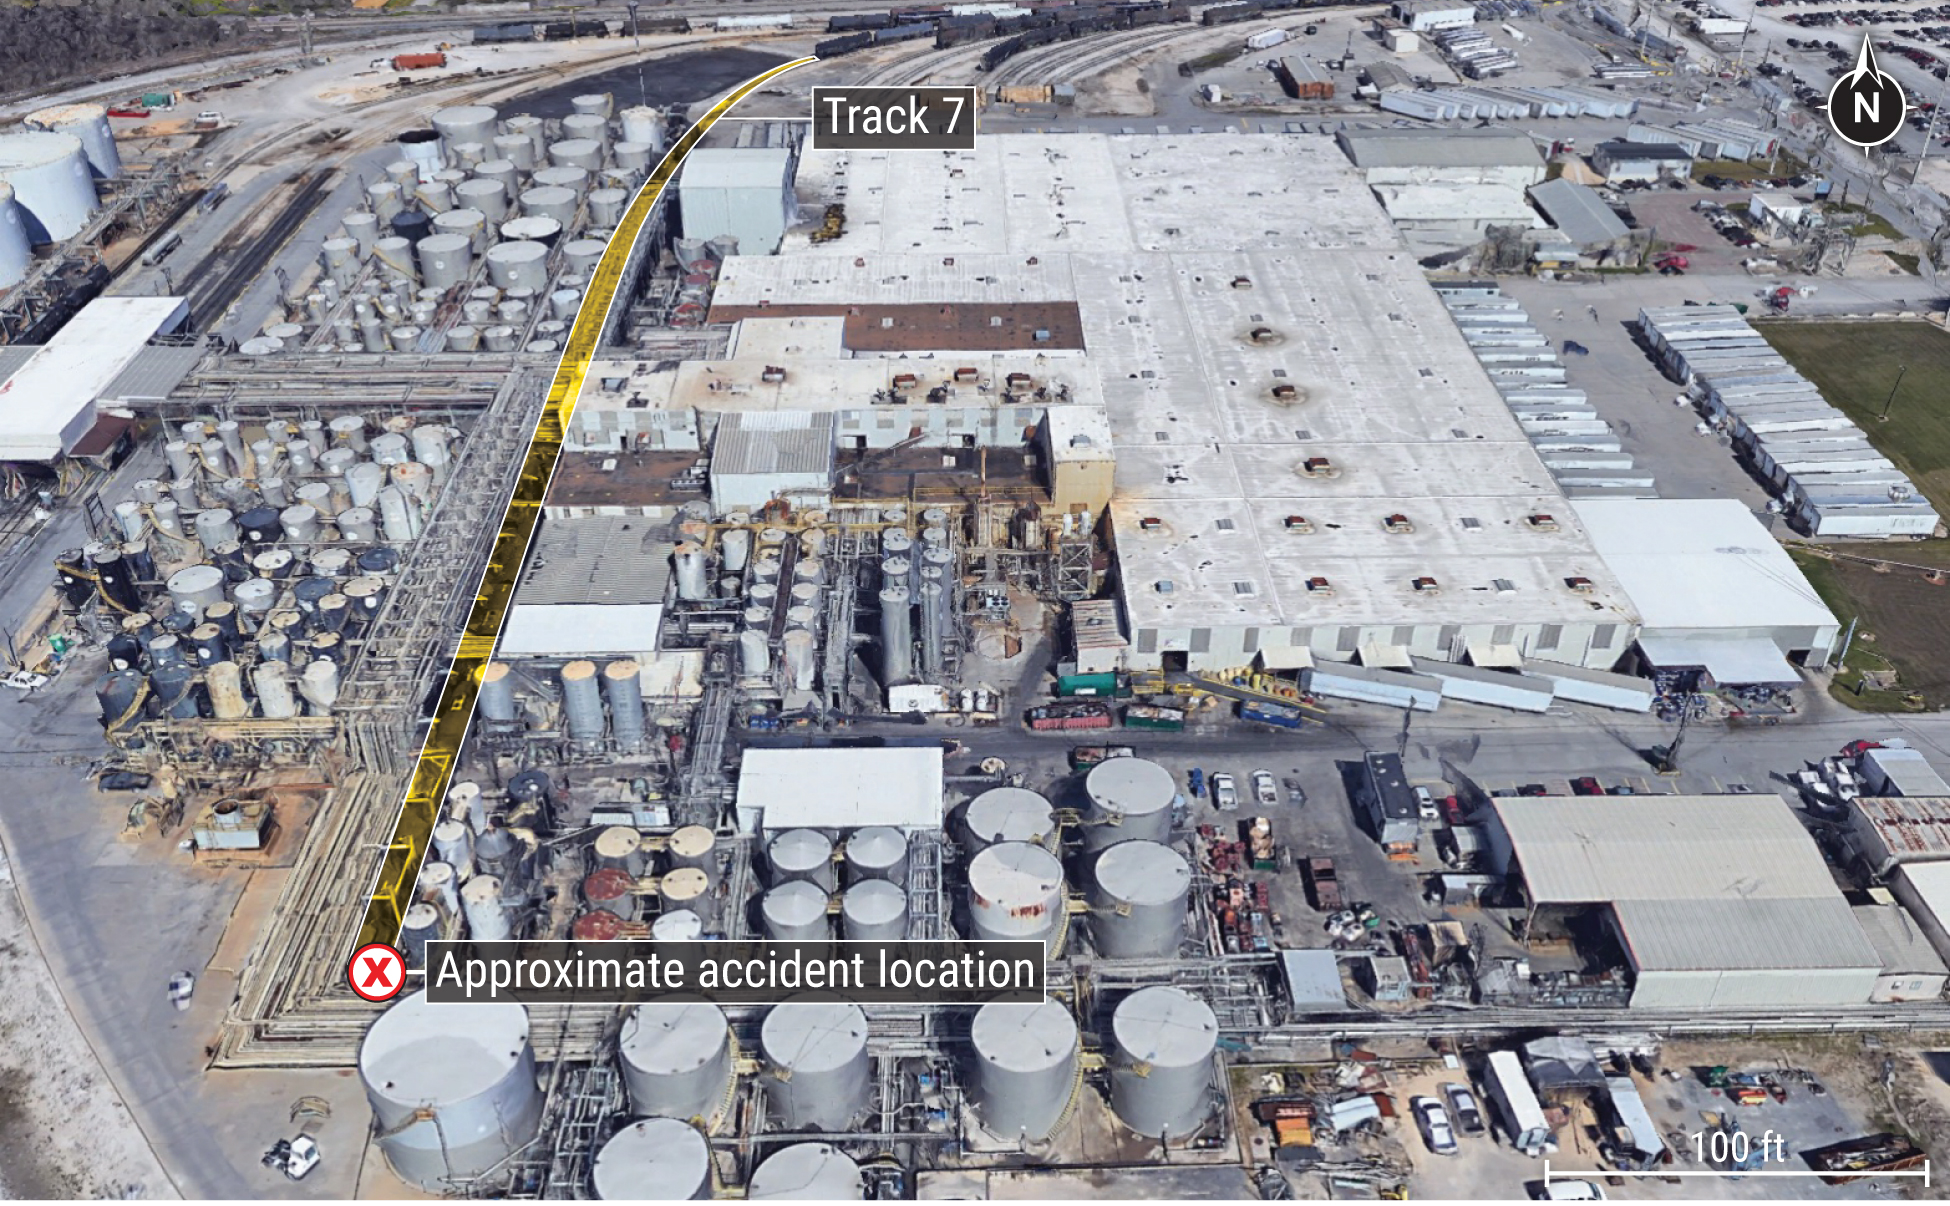 Overhead image of the accident location at the ExxonMobil refinery plant. (